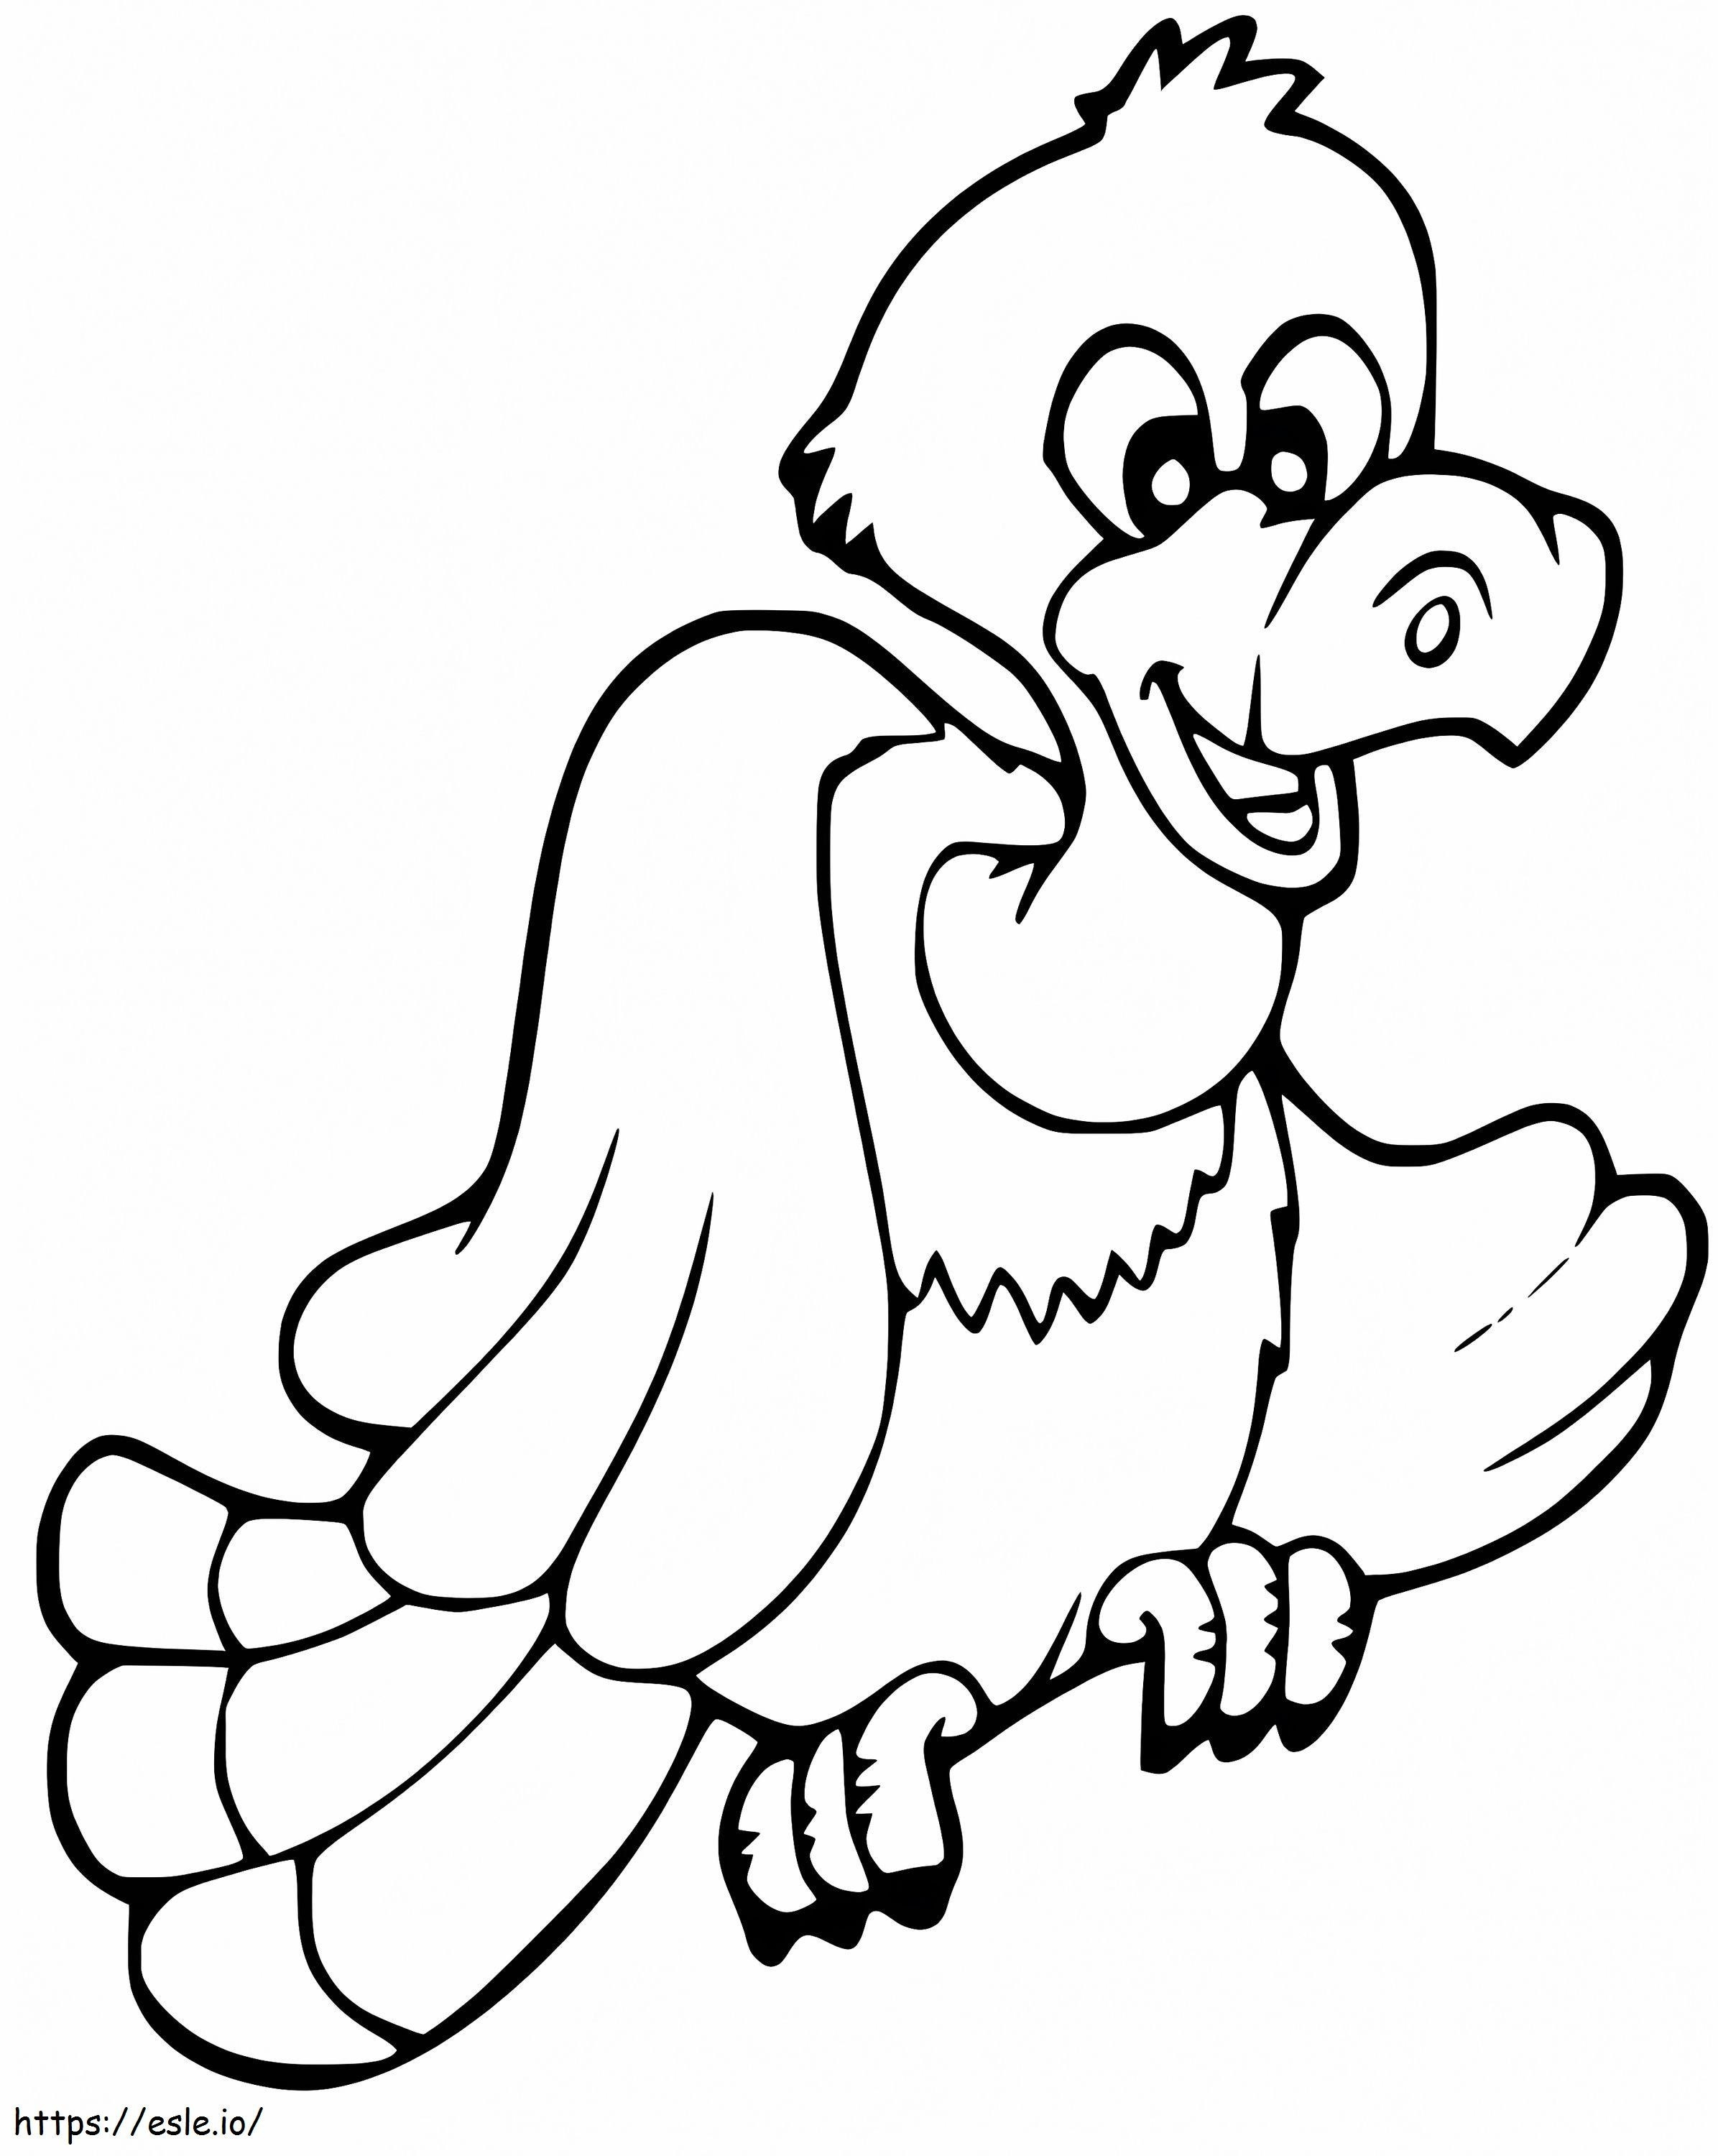 Adorable Vulture coloring page